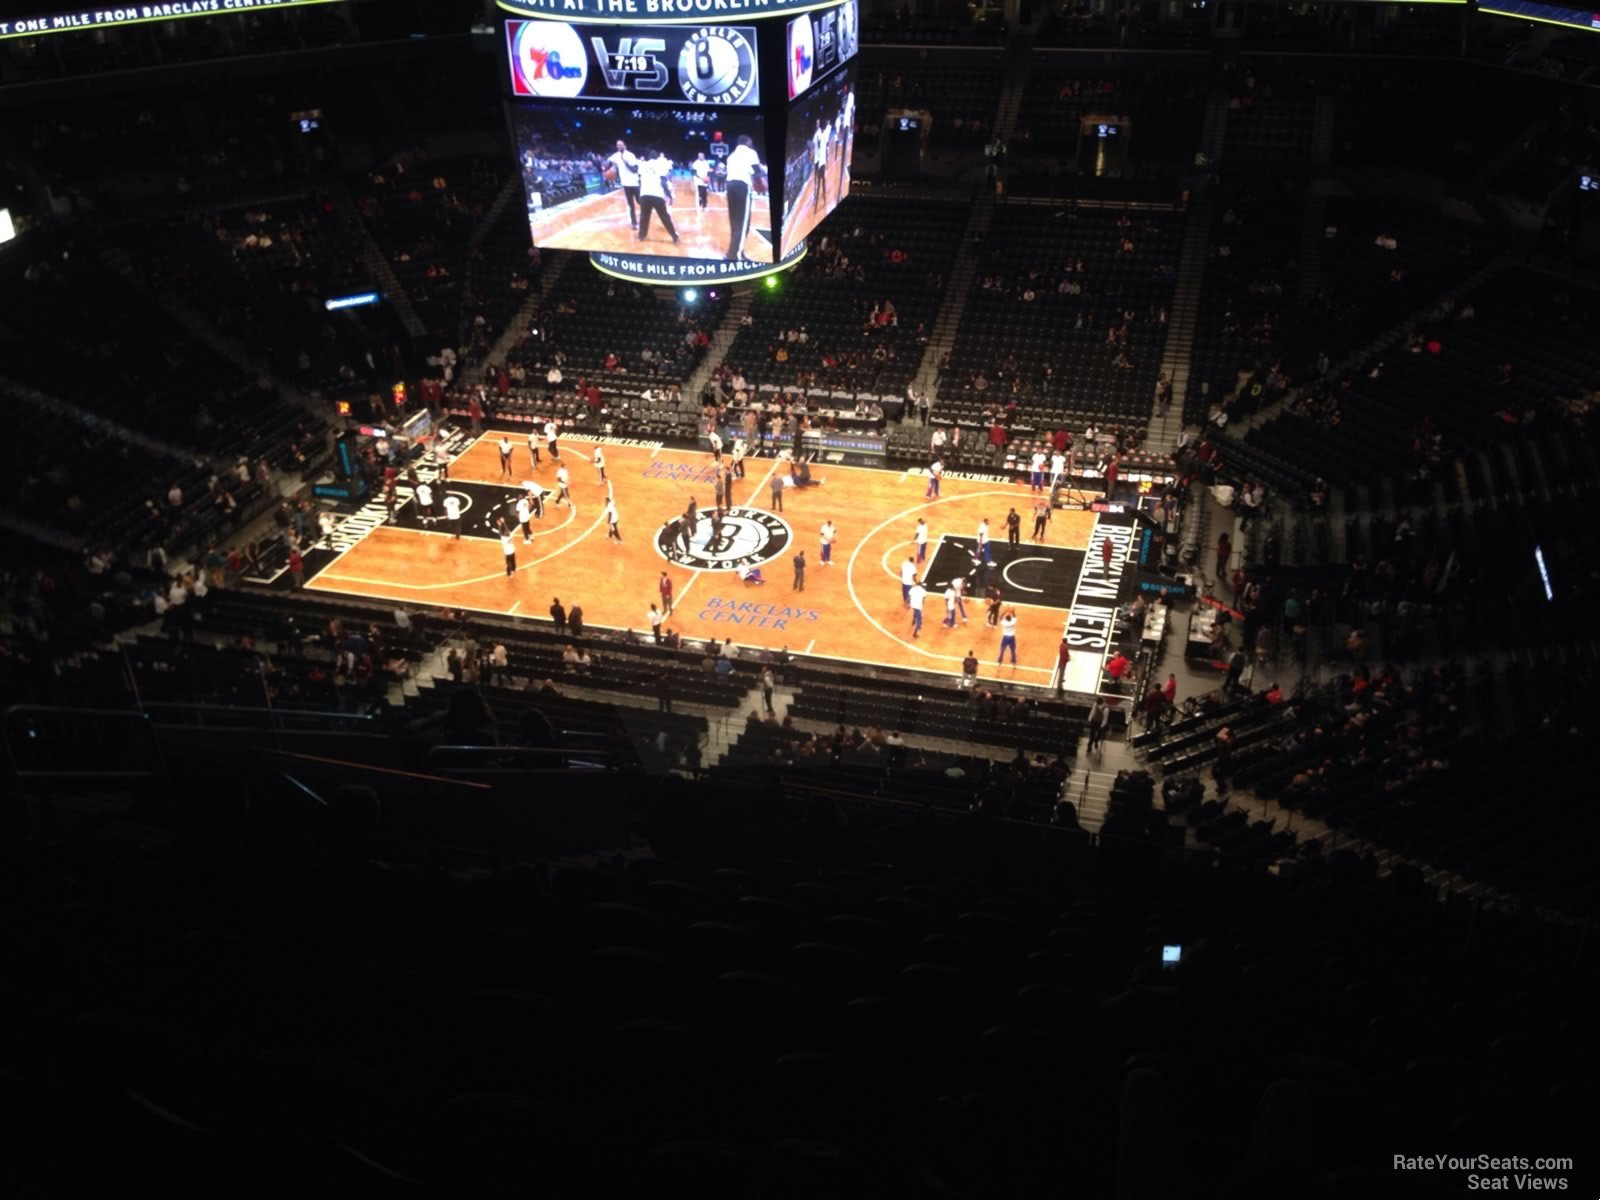 section 222, row 14 seat view  for basketball - barclays center